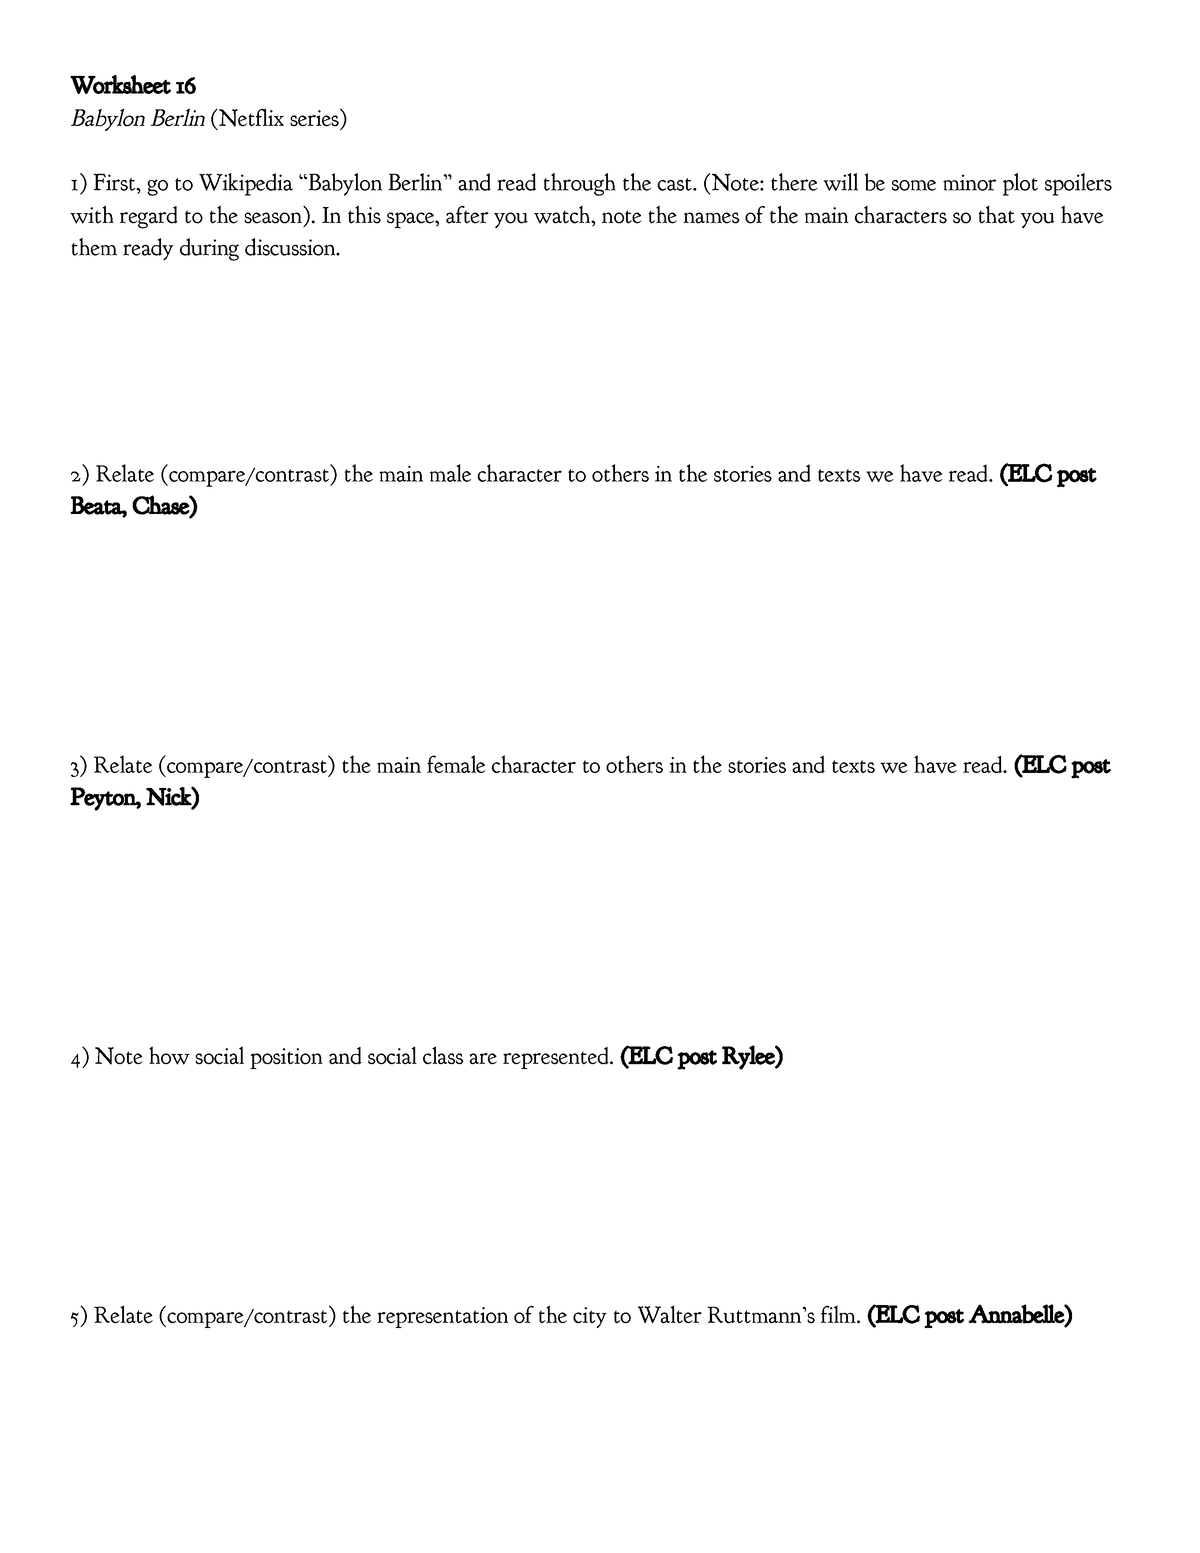 worksheet-16-babylon-berlin-note-there-will-be-some-minor-plot